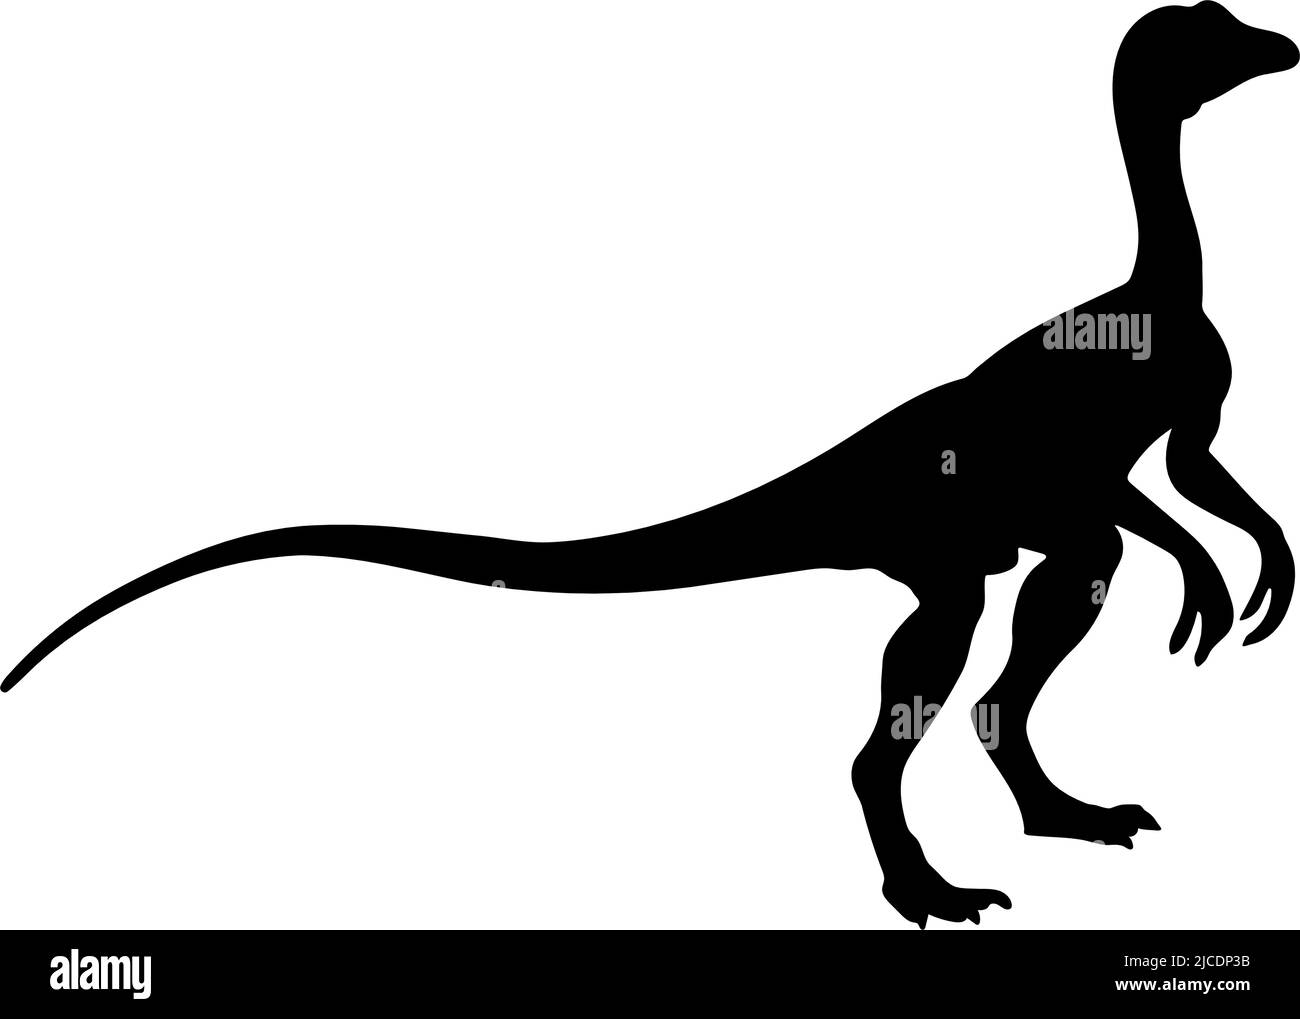 Dinosaurs of the Jurassic period. Silhouettes of different dinosaurs. Vector dinosaurs. Stock Vector